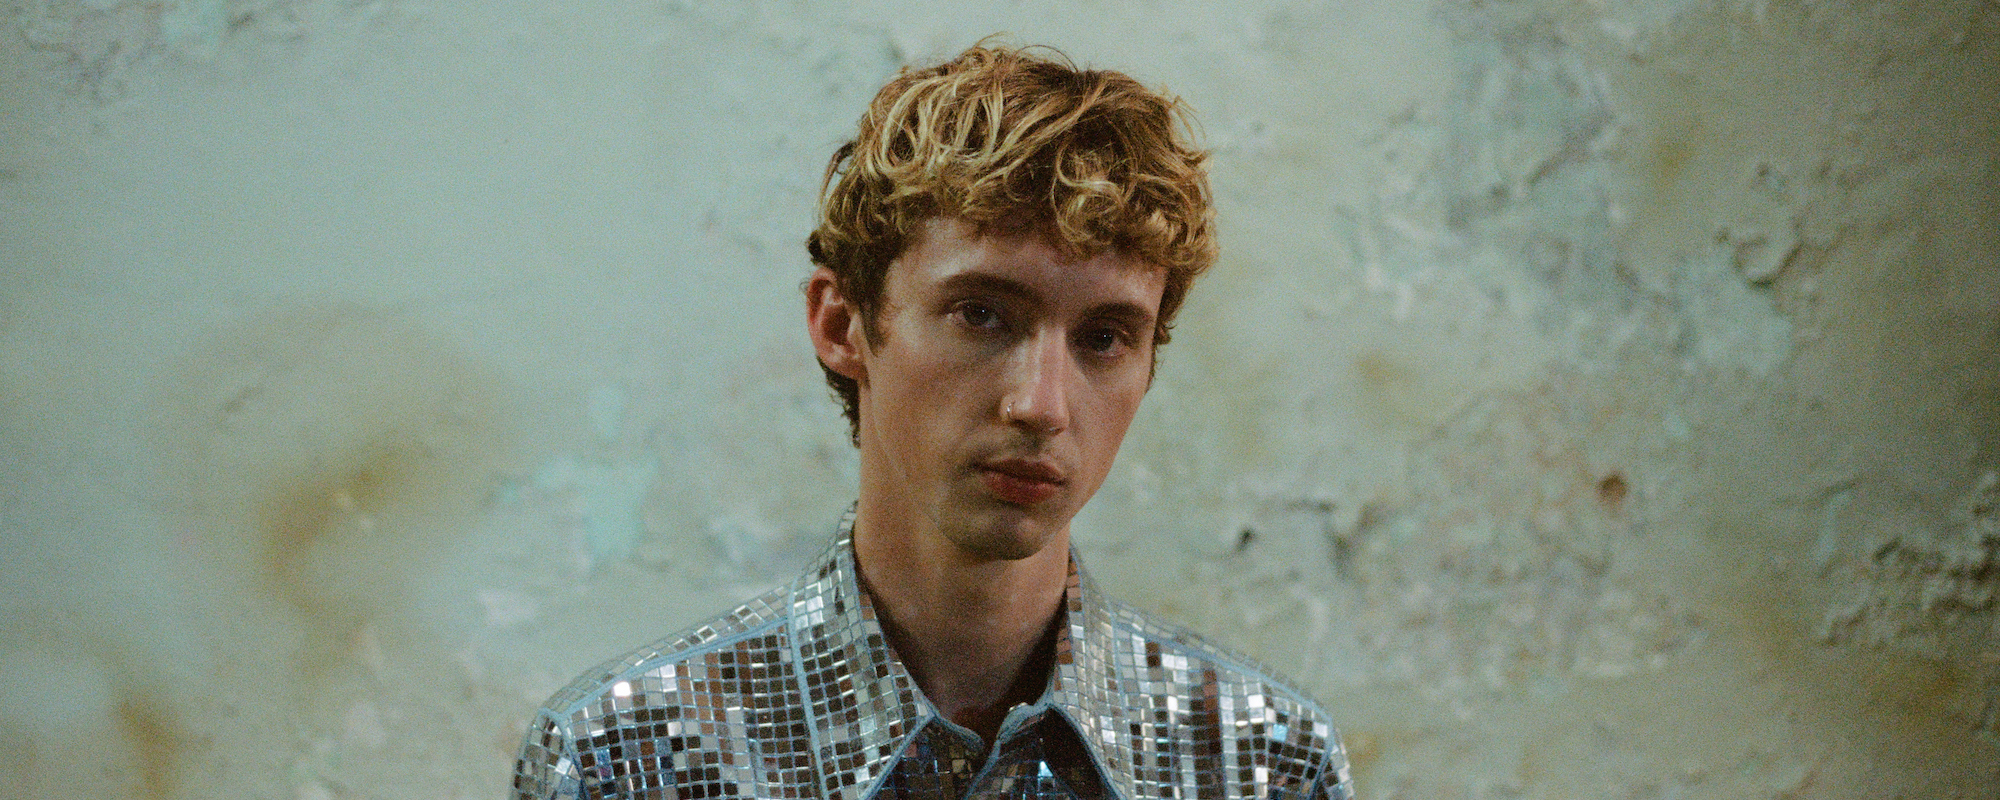 Troye Sivan Shares New Album, Dresses in Drag For “One of Your Girls” Music Video